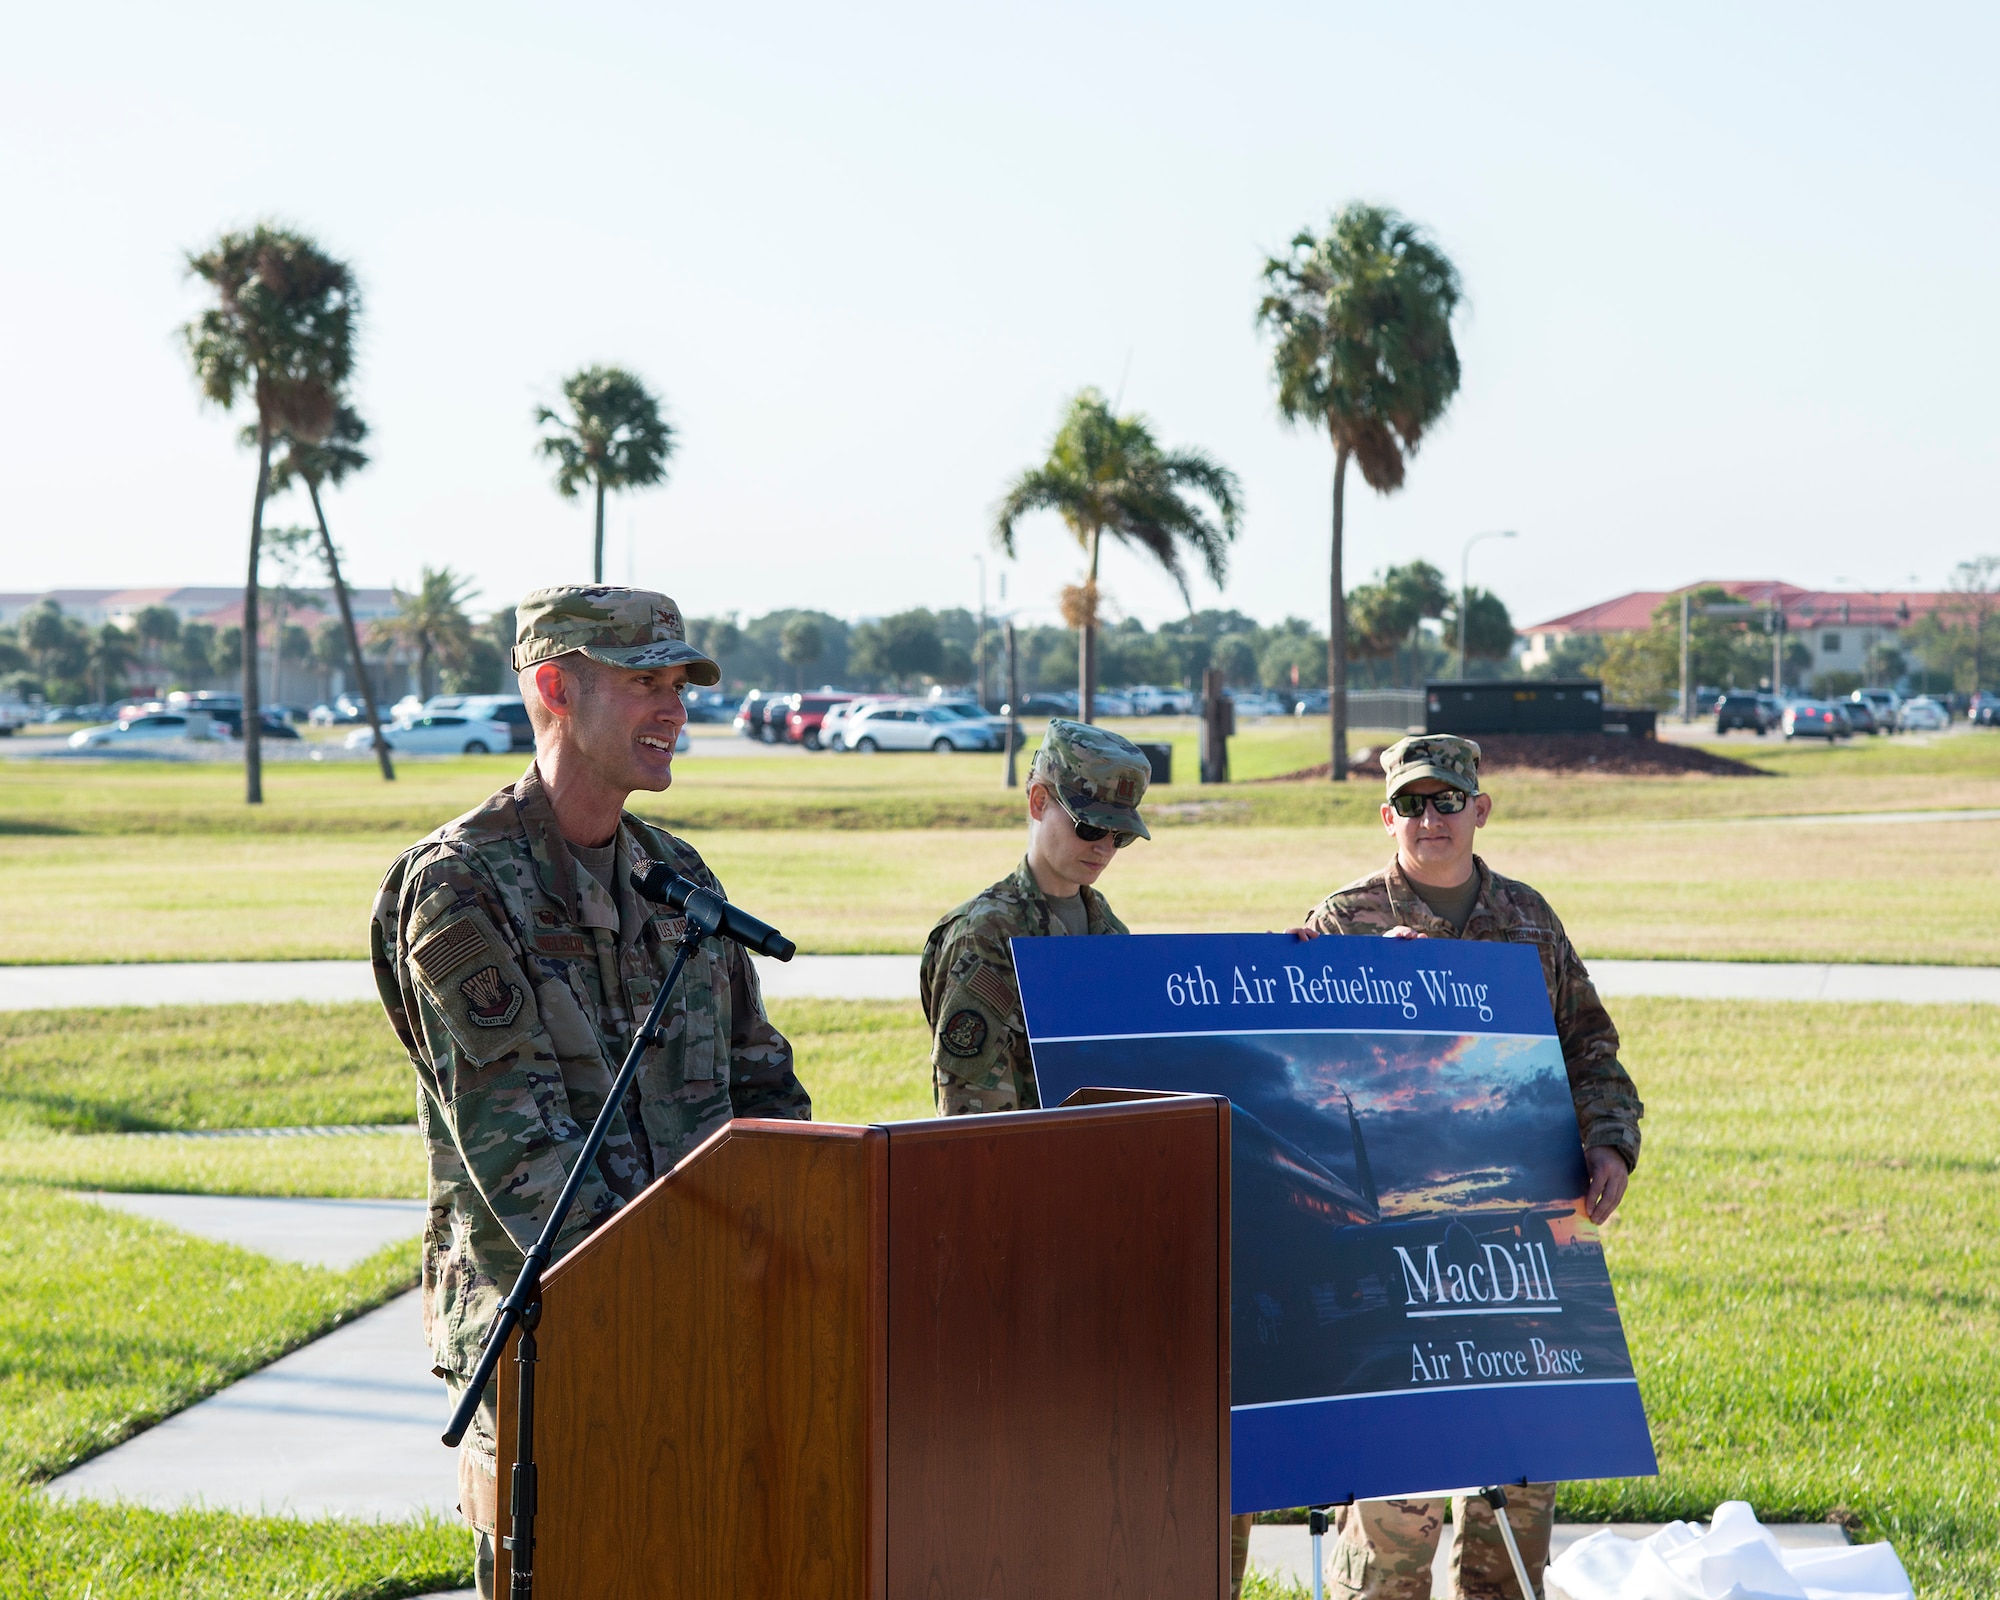 U.S. Air Force Col. Stephen Snelson, the 6th Air Refueling Wing (ARW) commander, speaks at the 6th ARW redesignation ceremony at MacDill Air Force Base, Fla., Sept. 30, 2019.